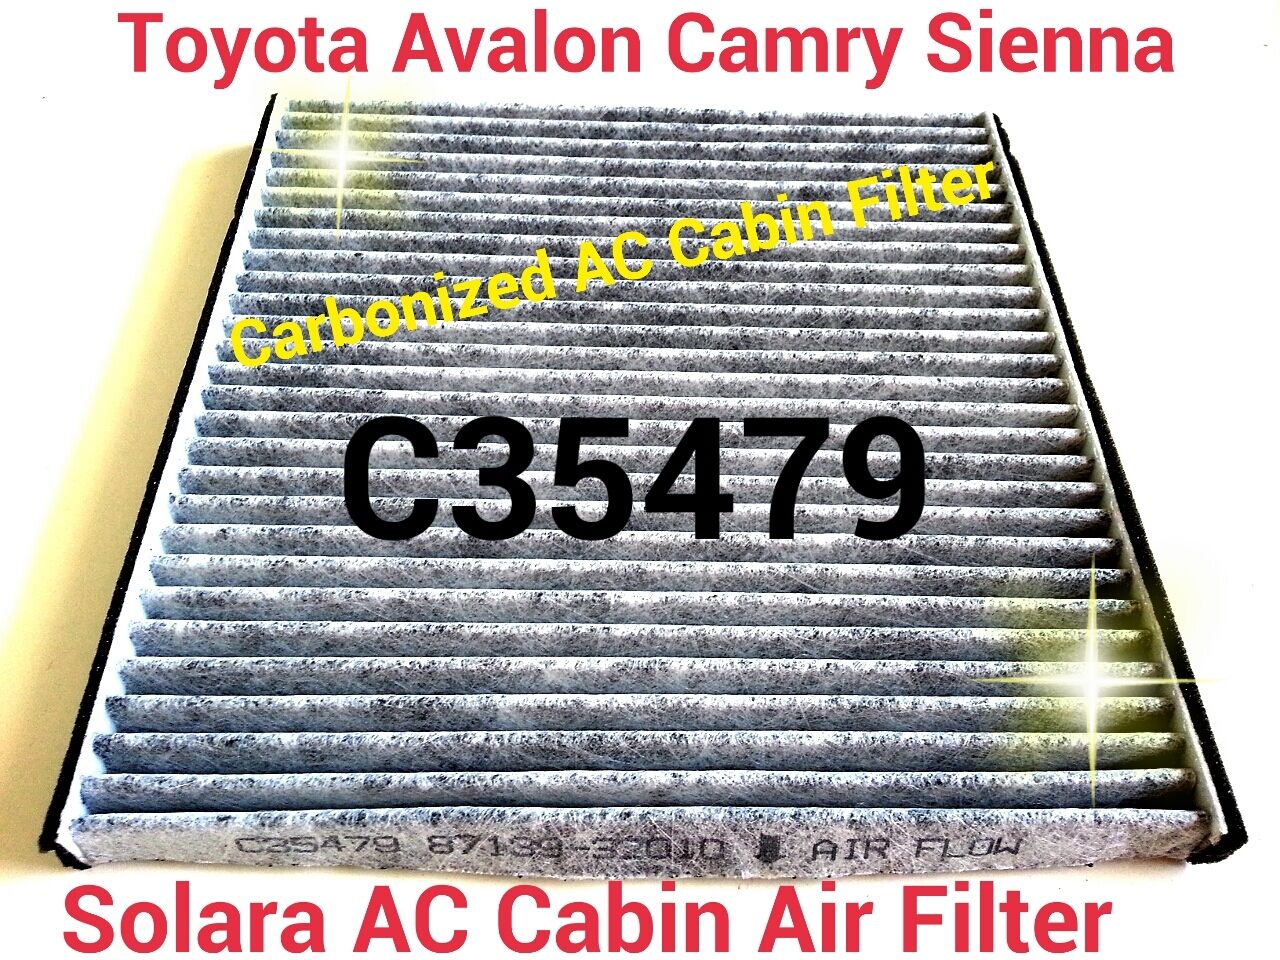 CARBONIZED CABIN AIR FILTER For Toyota Camry Avalon Sienna Solara Great Fit